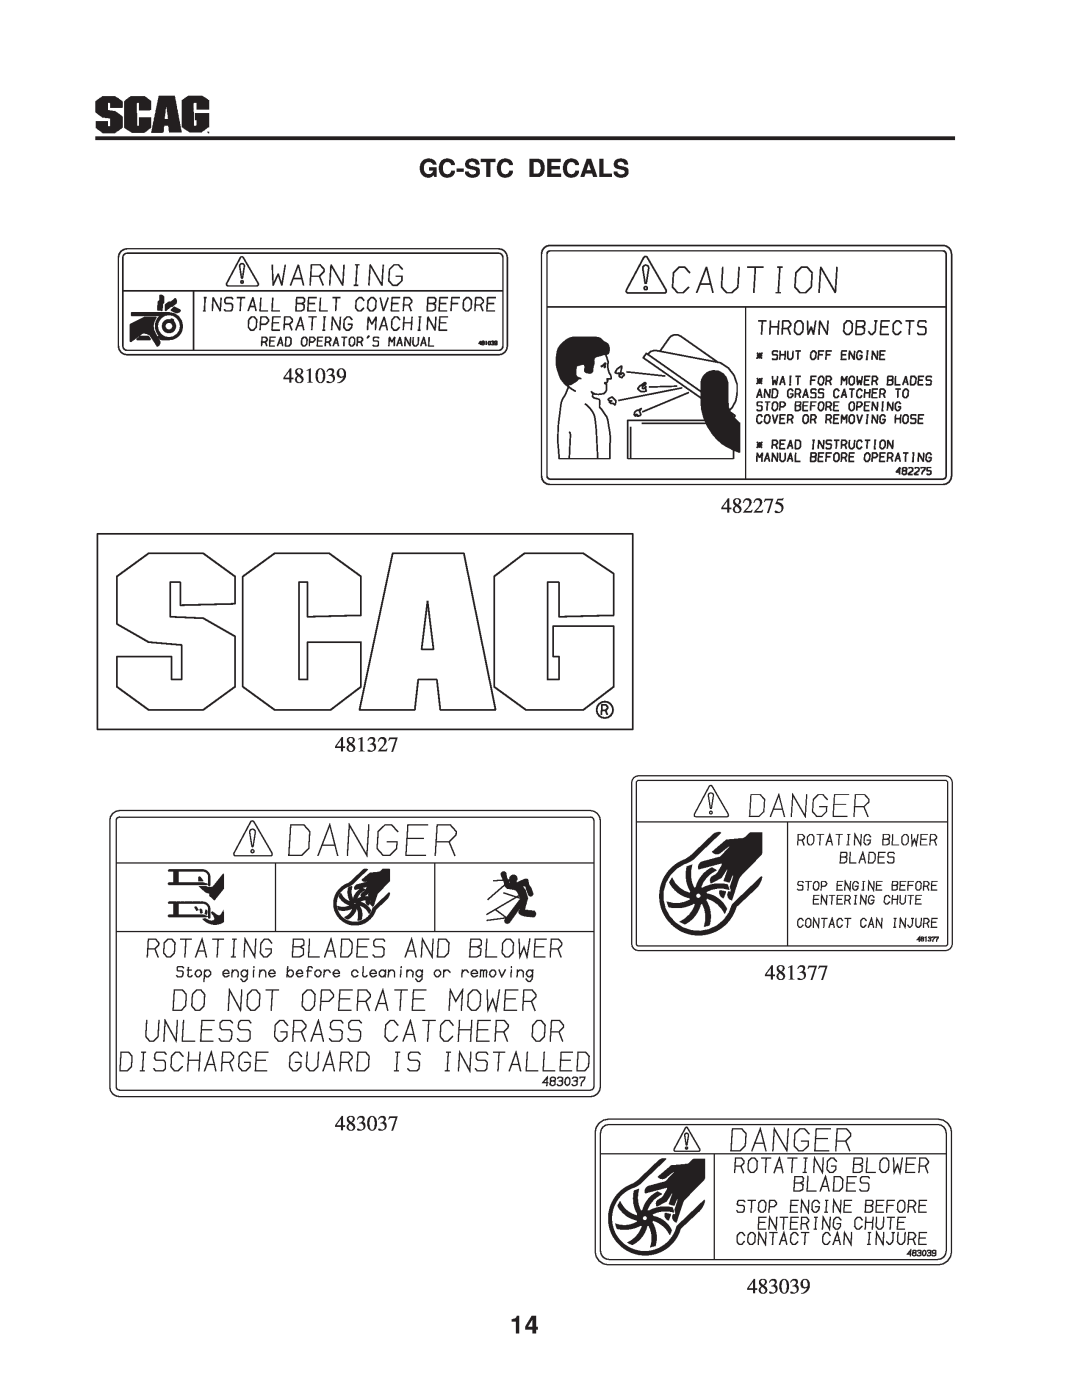 Scag Power Equipment GC-STC manual Gc-Stc Decals, 481039 482275 481327 